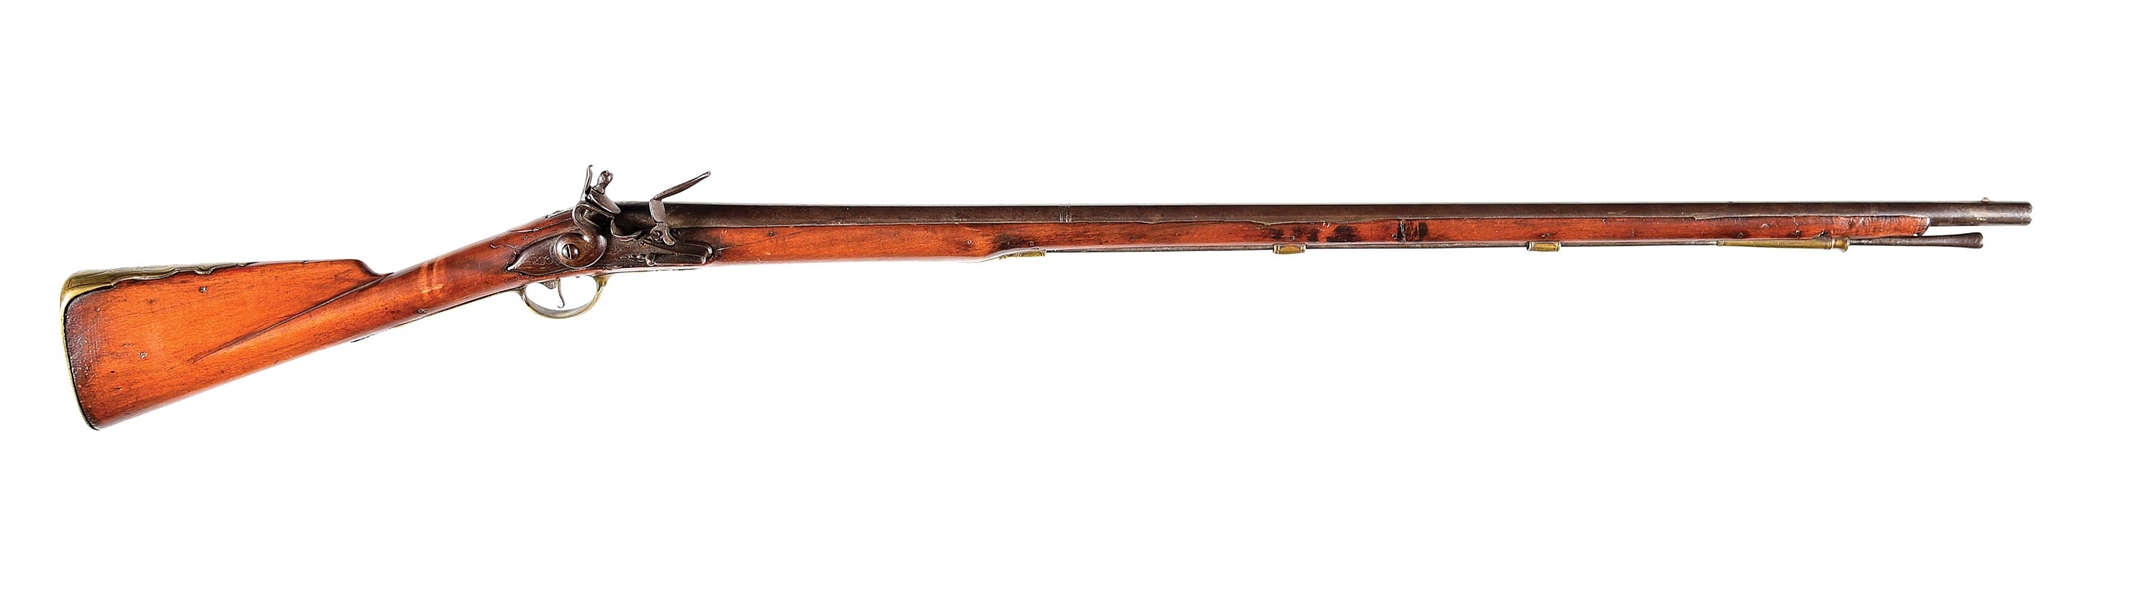 (A) AMERICAN STOCKED MUSKET WITH EARLY DUTCH COMPONENTS, EX. DUMONT